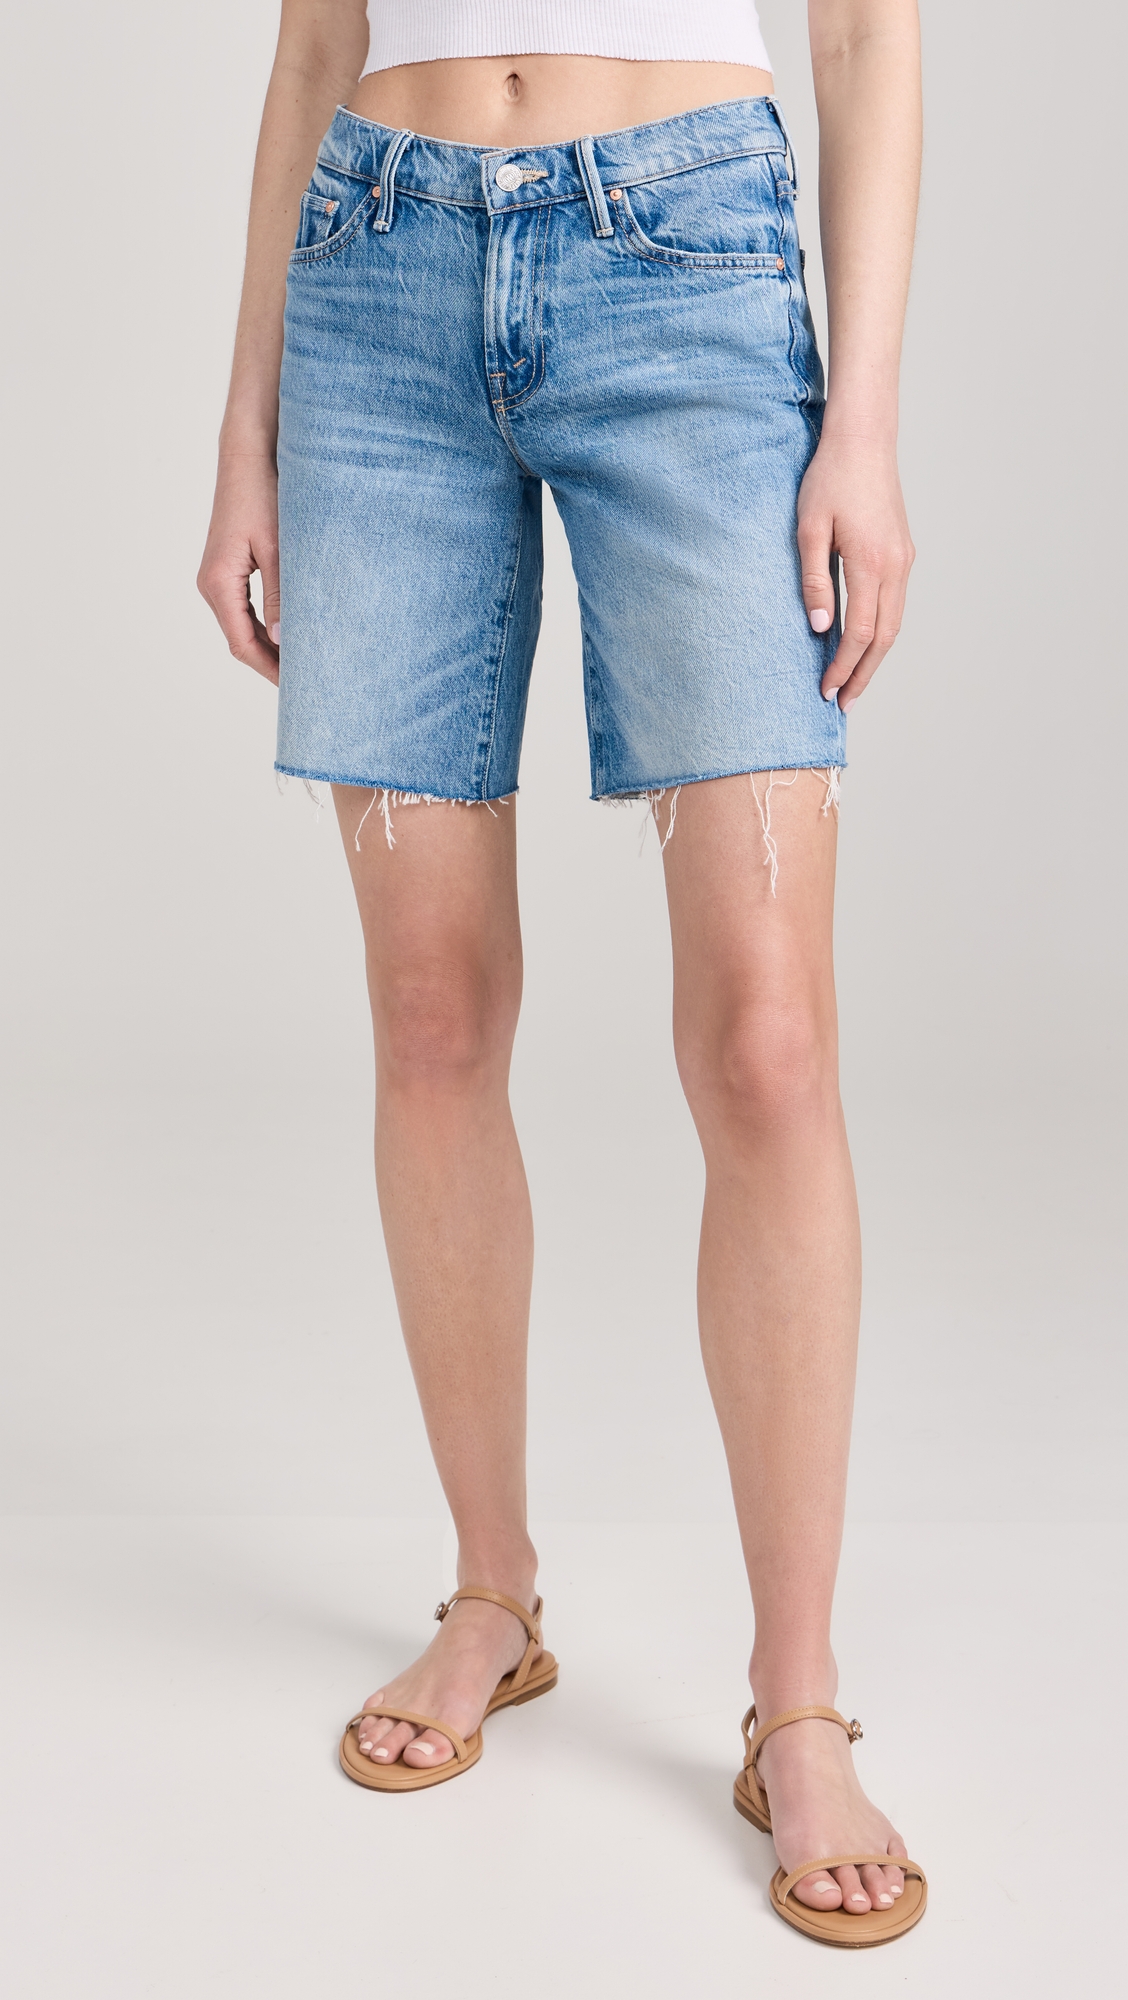 Down Low Undercover Shorts